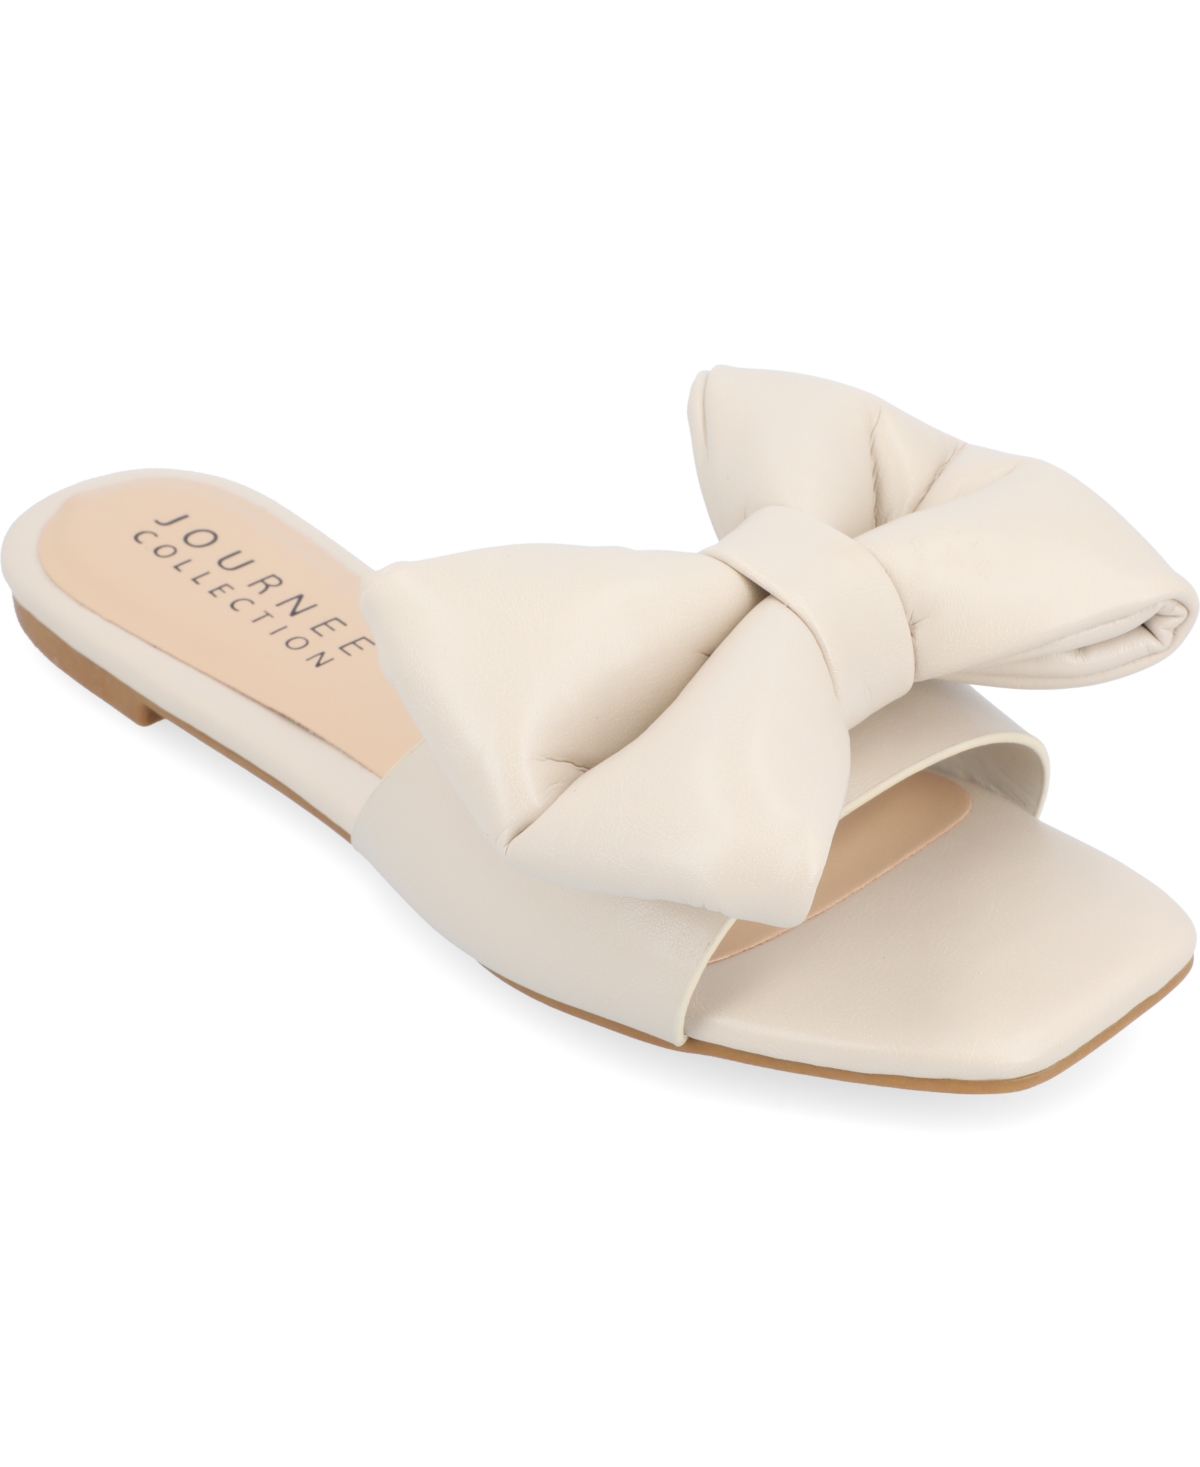 Shop Journee Collection Women's Fayre Oversized Bow Slip On Flat Sandals